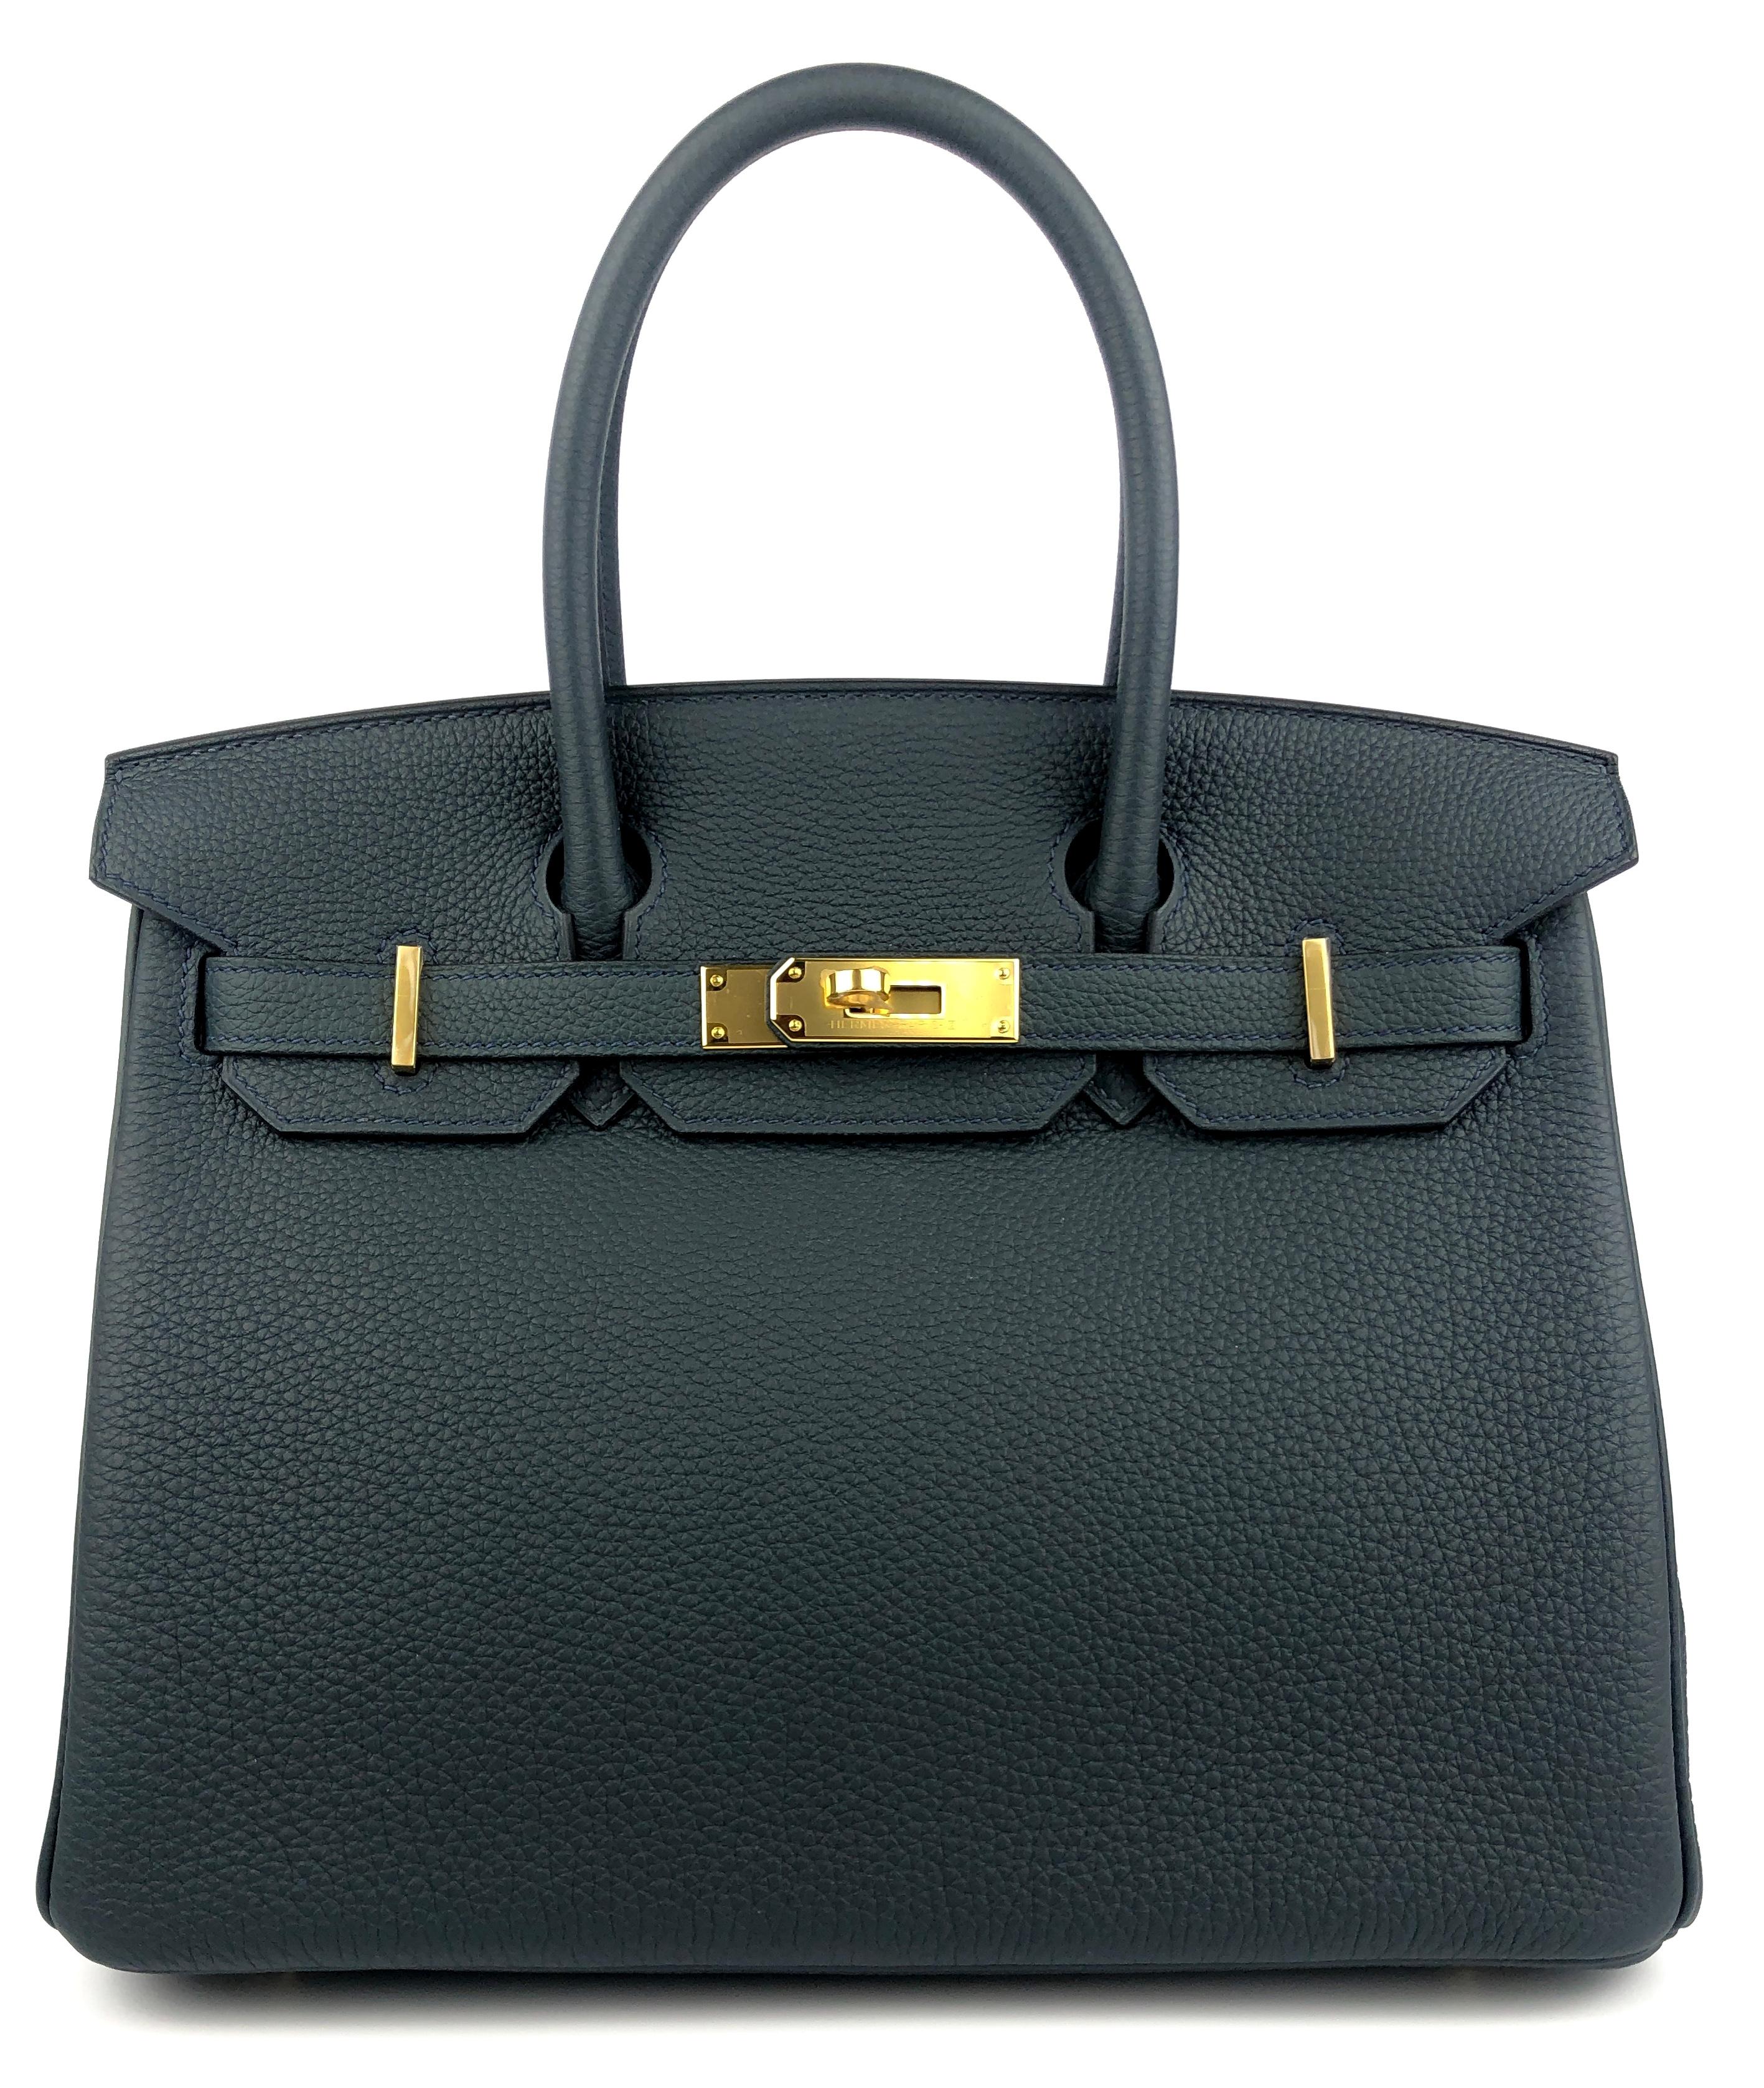 Absolutely Stunning Rare Hermes Birkin 30 Vert Rousseau Togo Leather complimented by Gold Hardware. As New 2019 D Stamp. Beautiful Dark Green looks Black at Night.

Shop with Confidence from Lux Addicts. Authenticity Guaranteed! 
